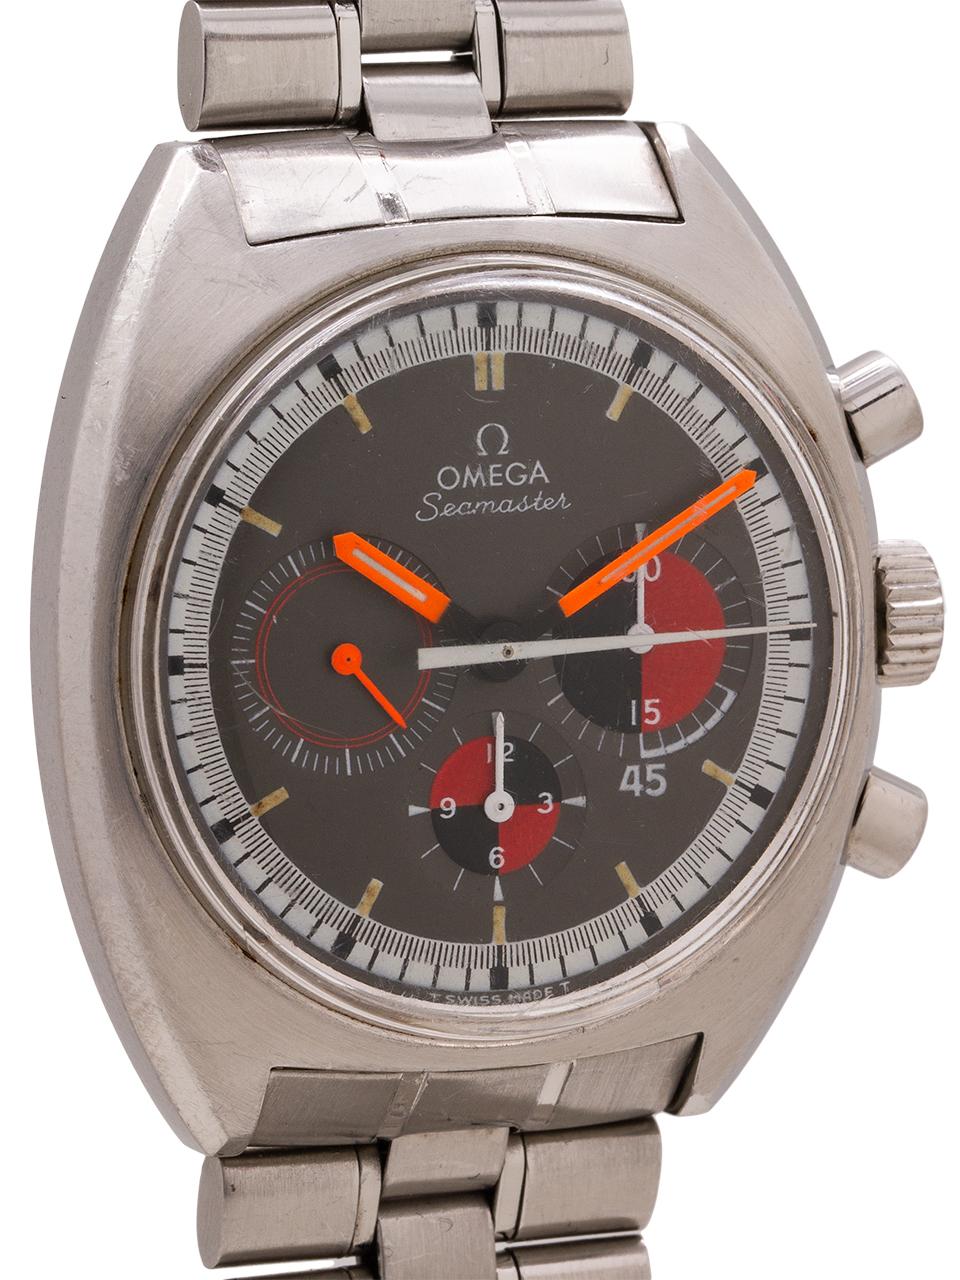 
Omega stainless steel Soccer Timer chronograph ref# 145.020 serial # million circa 1969. Featuring 39.5 x 47mm cushion shaped case with beautiful condition original black dial with brilliant black and red accents, white minute track and black outer